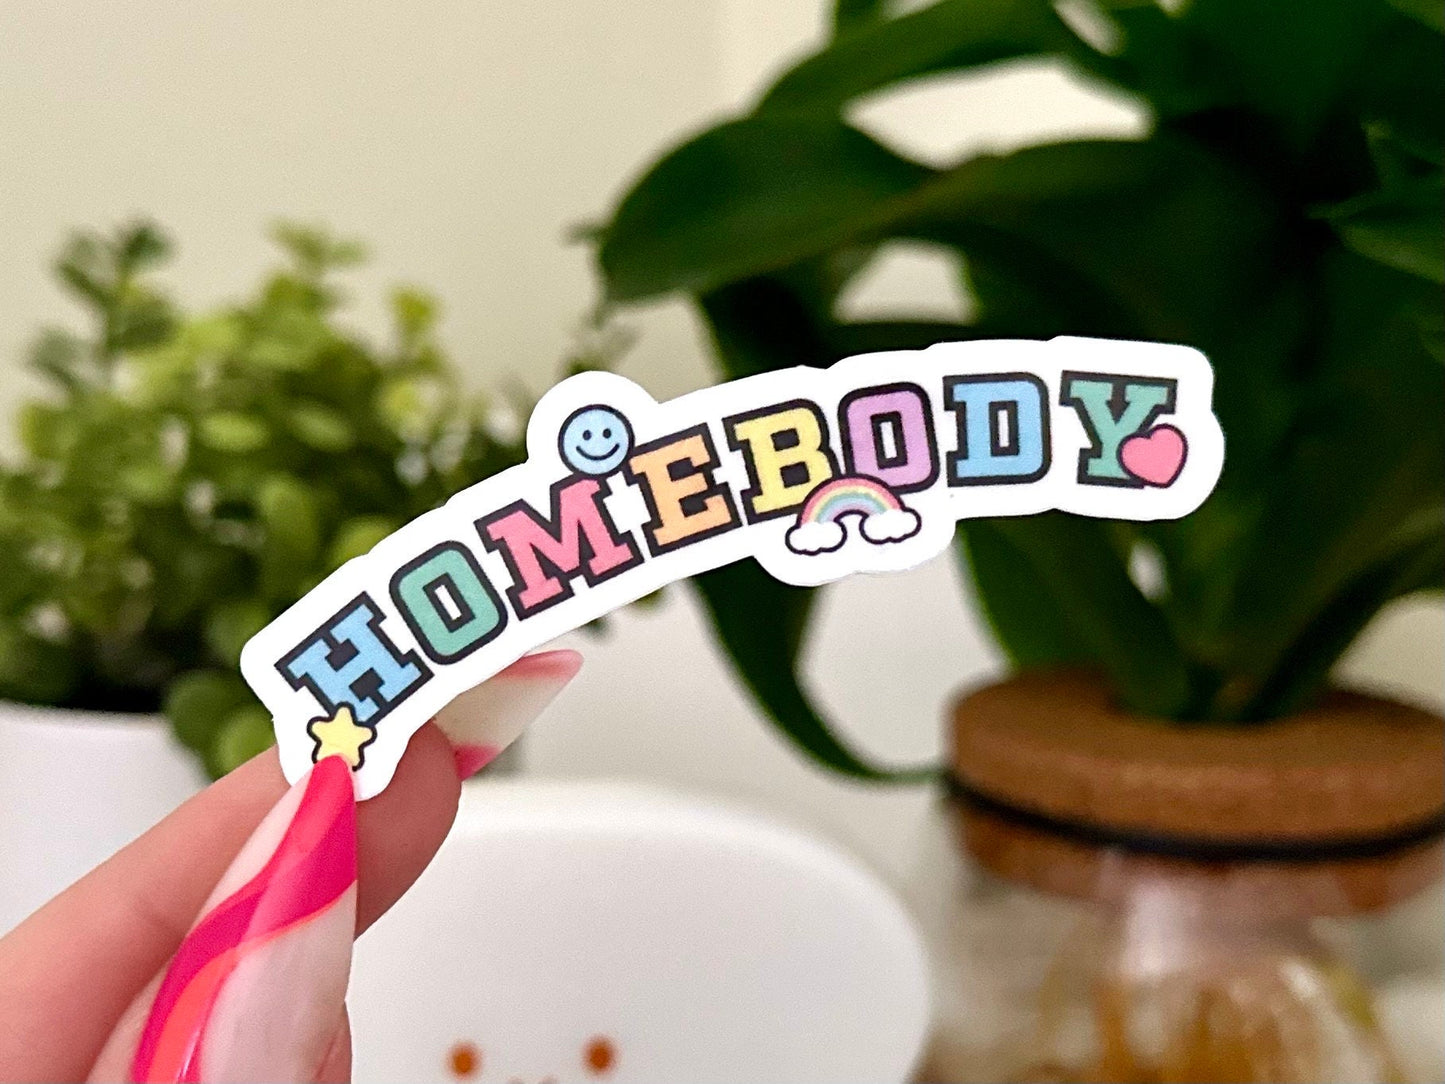 Homebody Waterproof Sticker, Funny Gifts, Trendy Decal, Cute Stickers, Waterbottle Sticker, Cozy Introvert Gifts